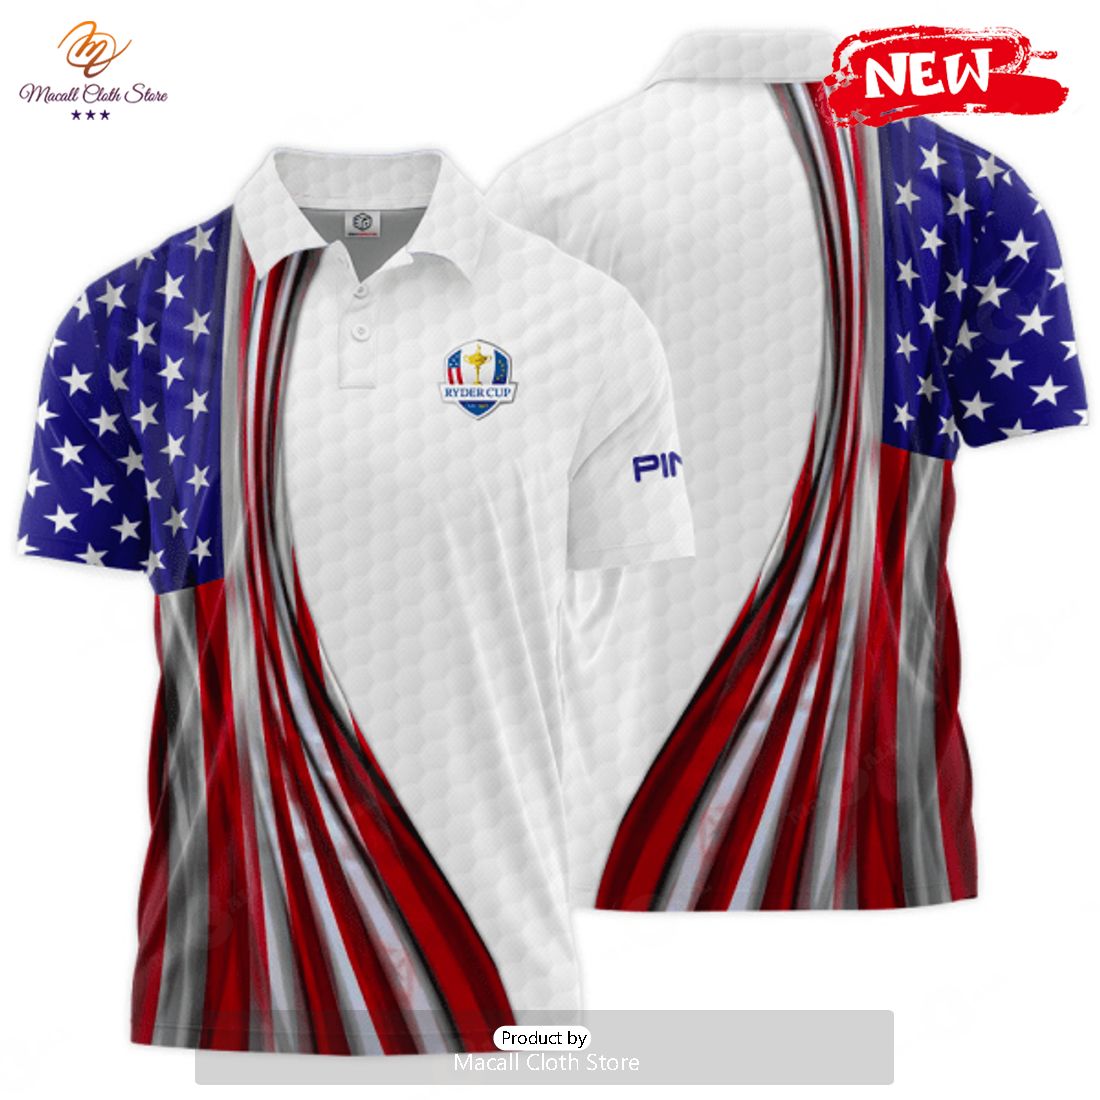 [NEW] Ryder Cup x PING Flags Stars 3D Apparels White Polo Shirt ...